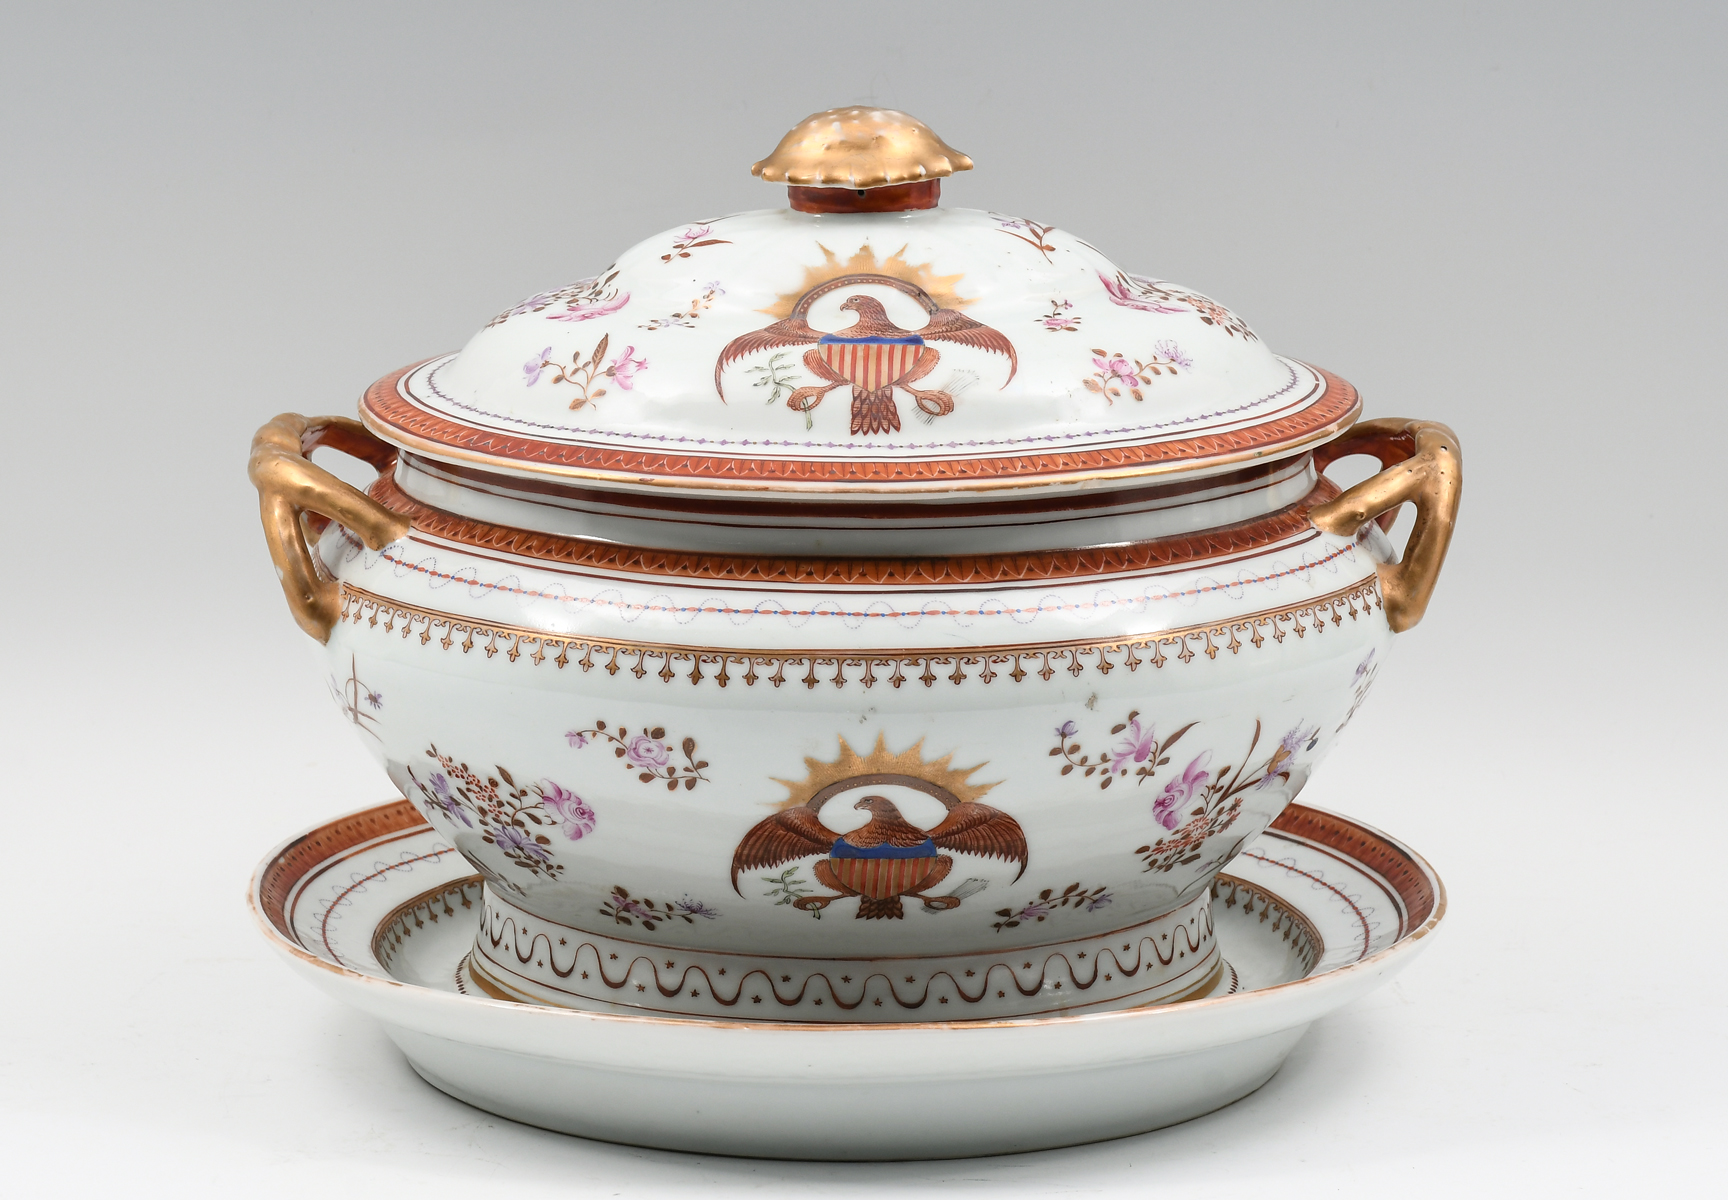 CHINESE COVERED PORCELAIN TUREEN 2ece48